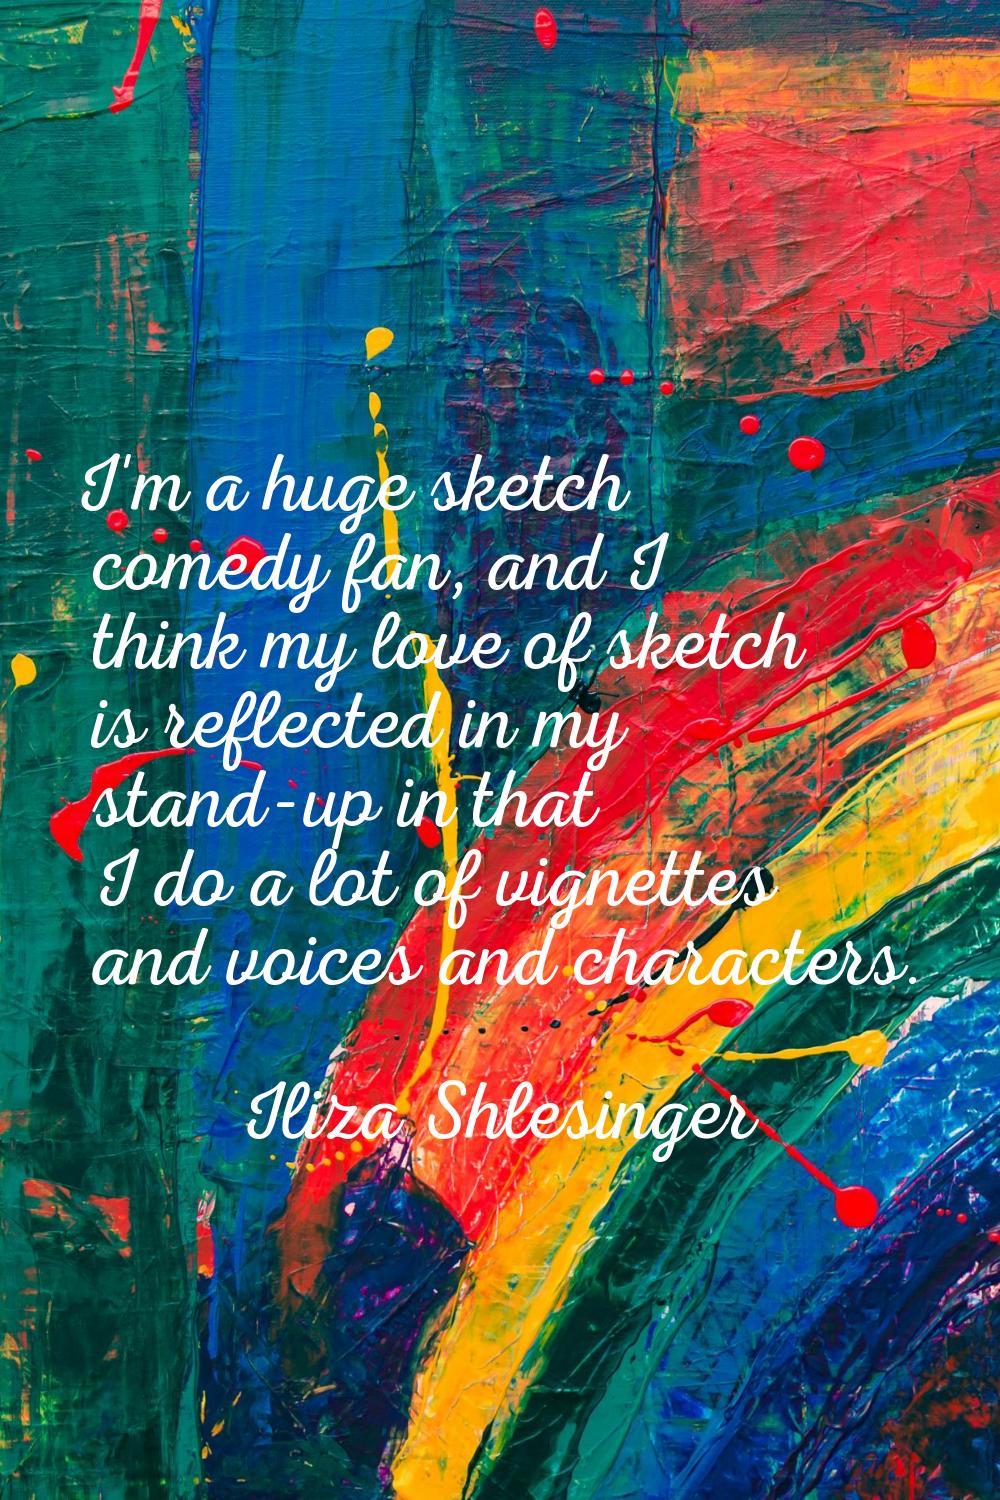 I'm a huge sketch comedy fan, and I think my love of sketch is reflected in my stand-up in that I d